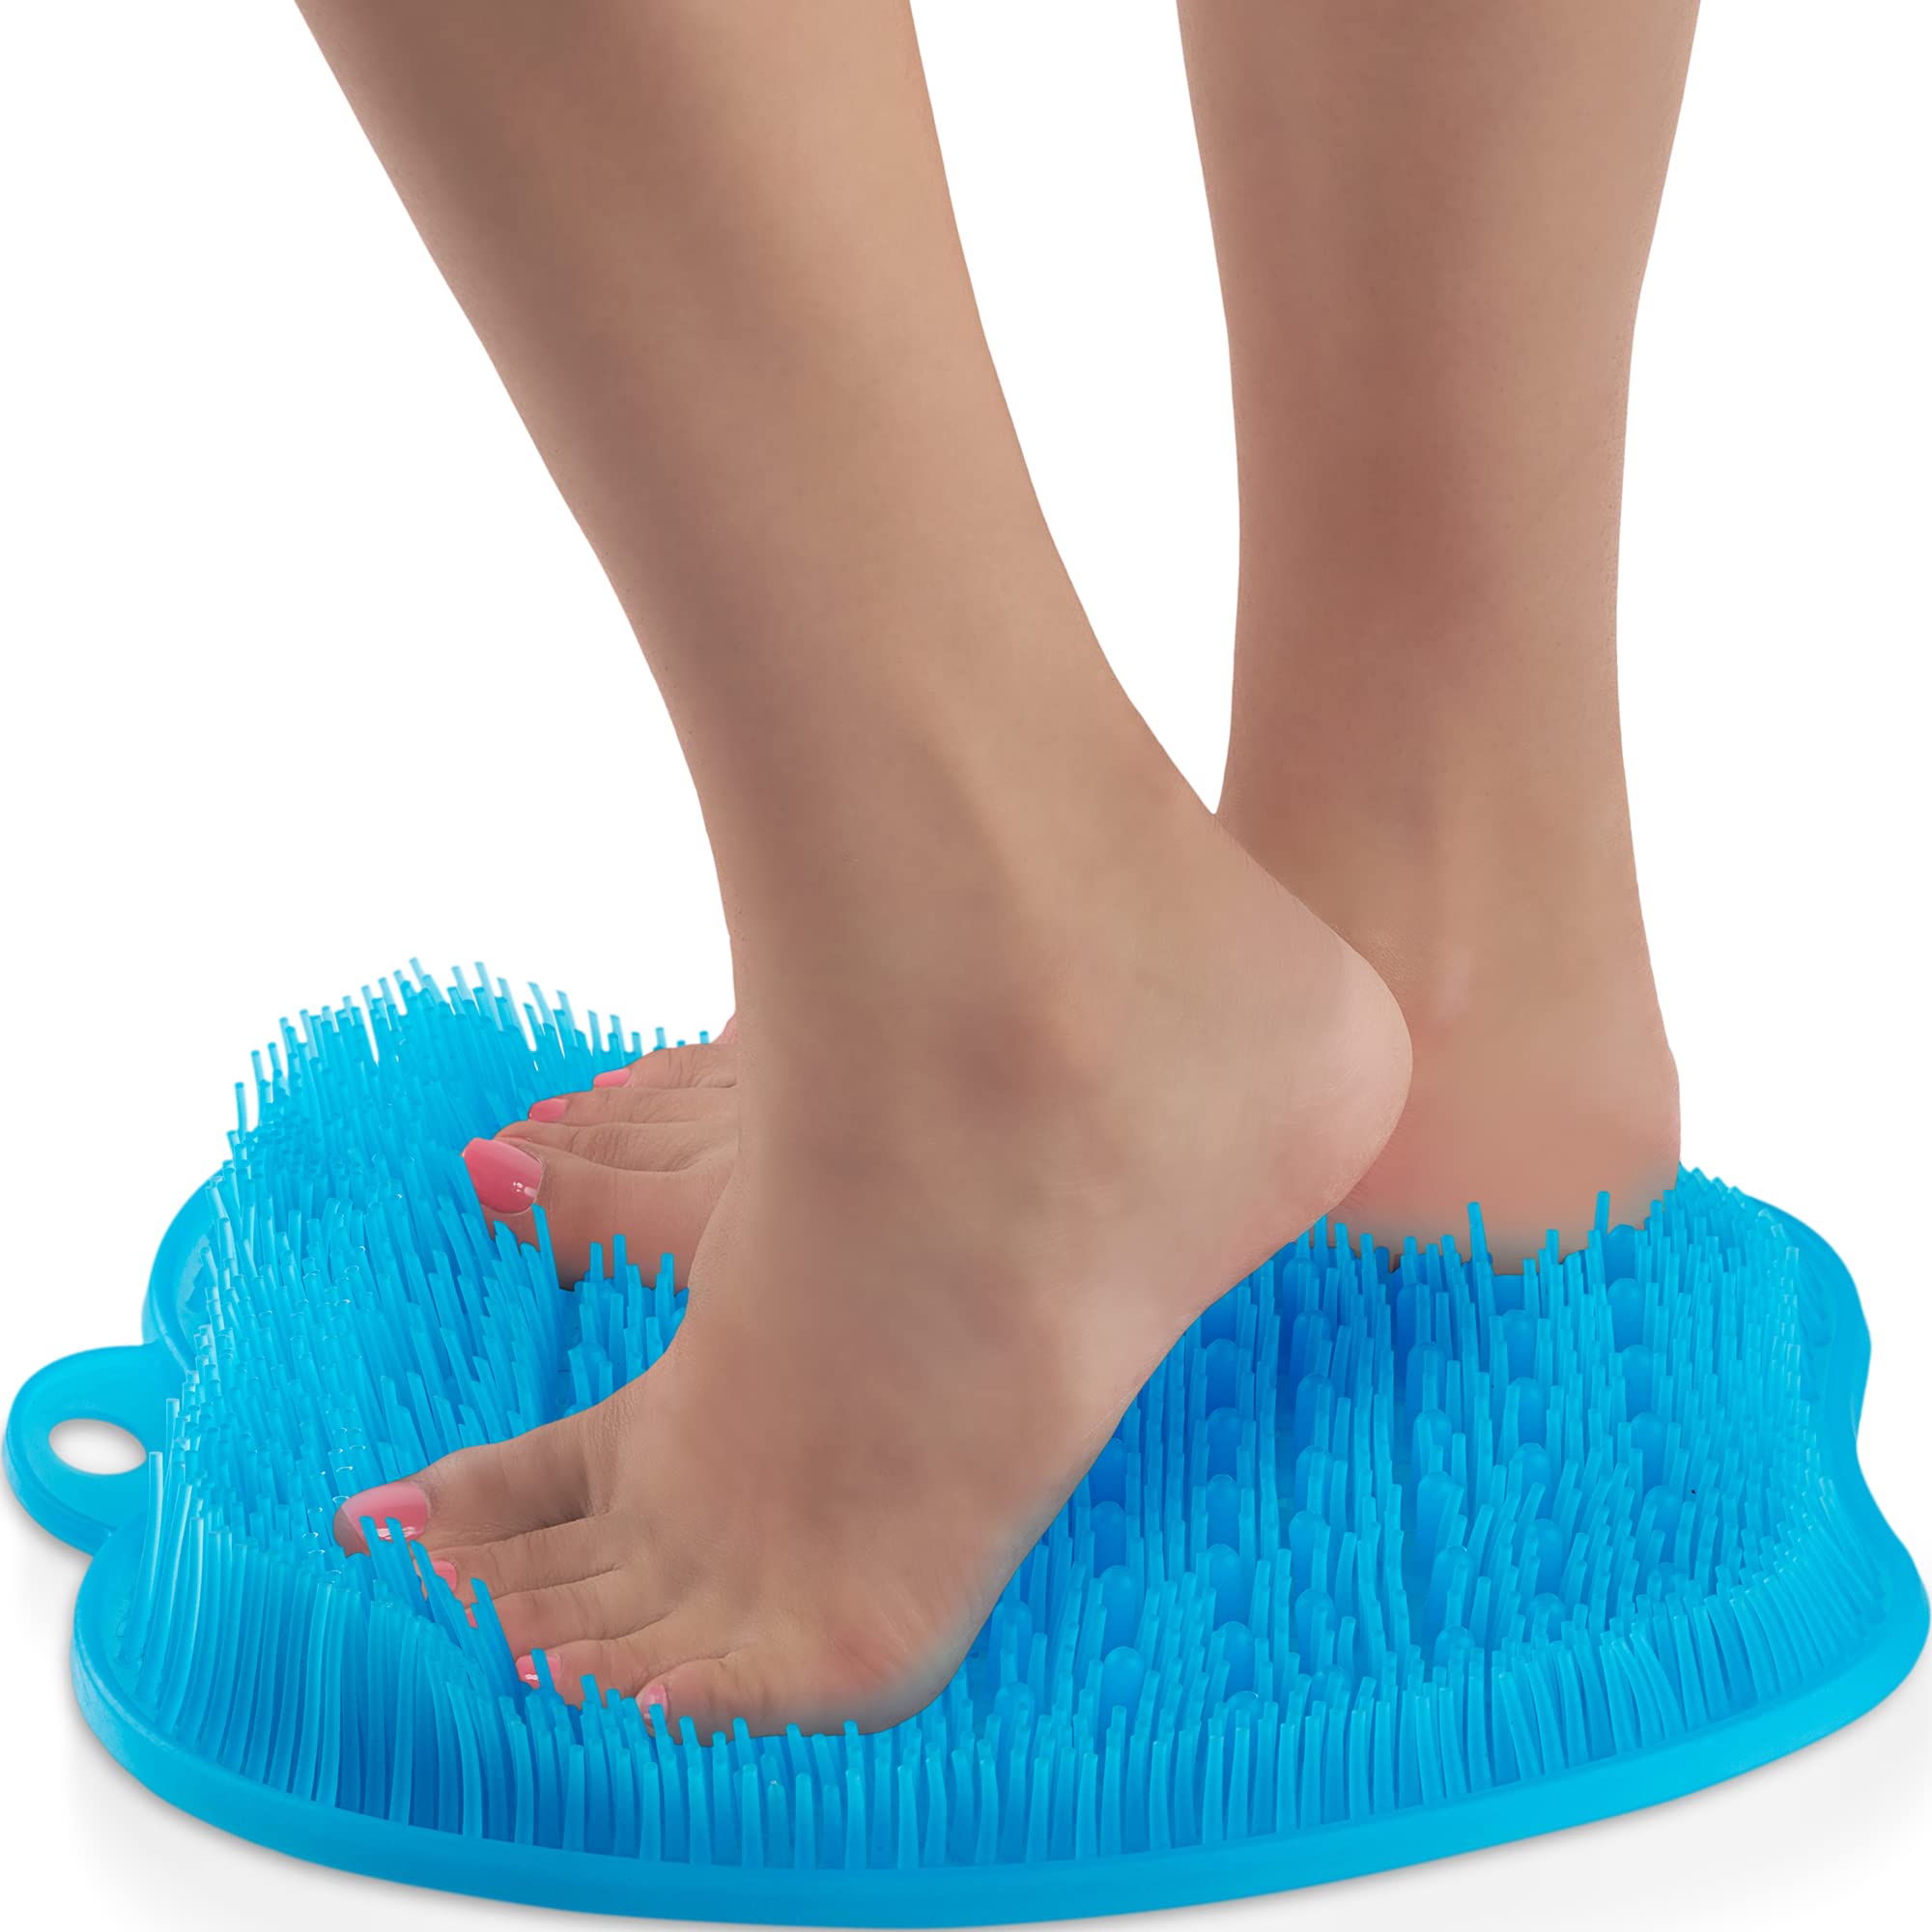 Majestic Ace Shower Foot Scrubber MAT-FOOT Circulation & Relieve Tired Feet, Foot Scrubber for Use in Shower with Non-Slip Suction Cups Green, Size: 30